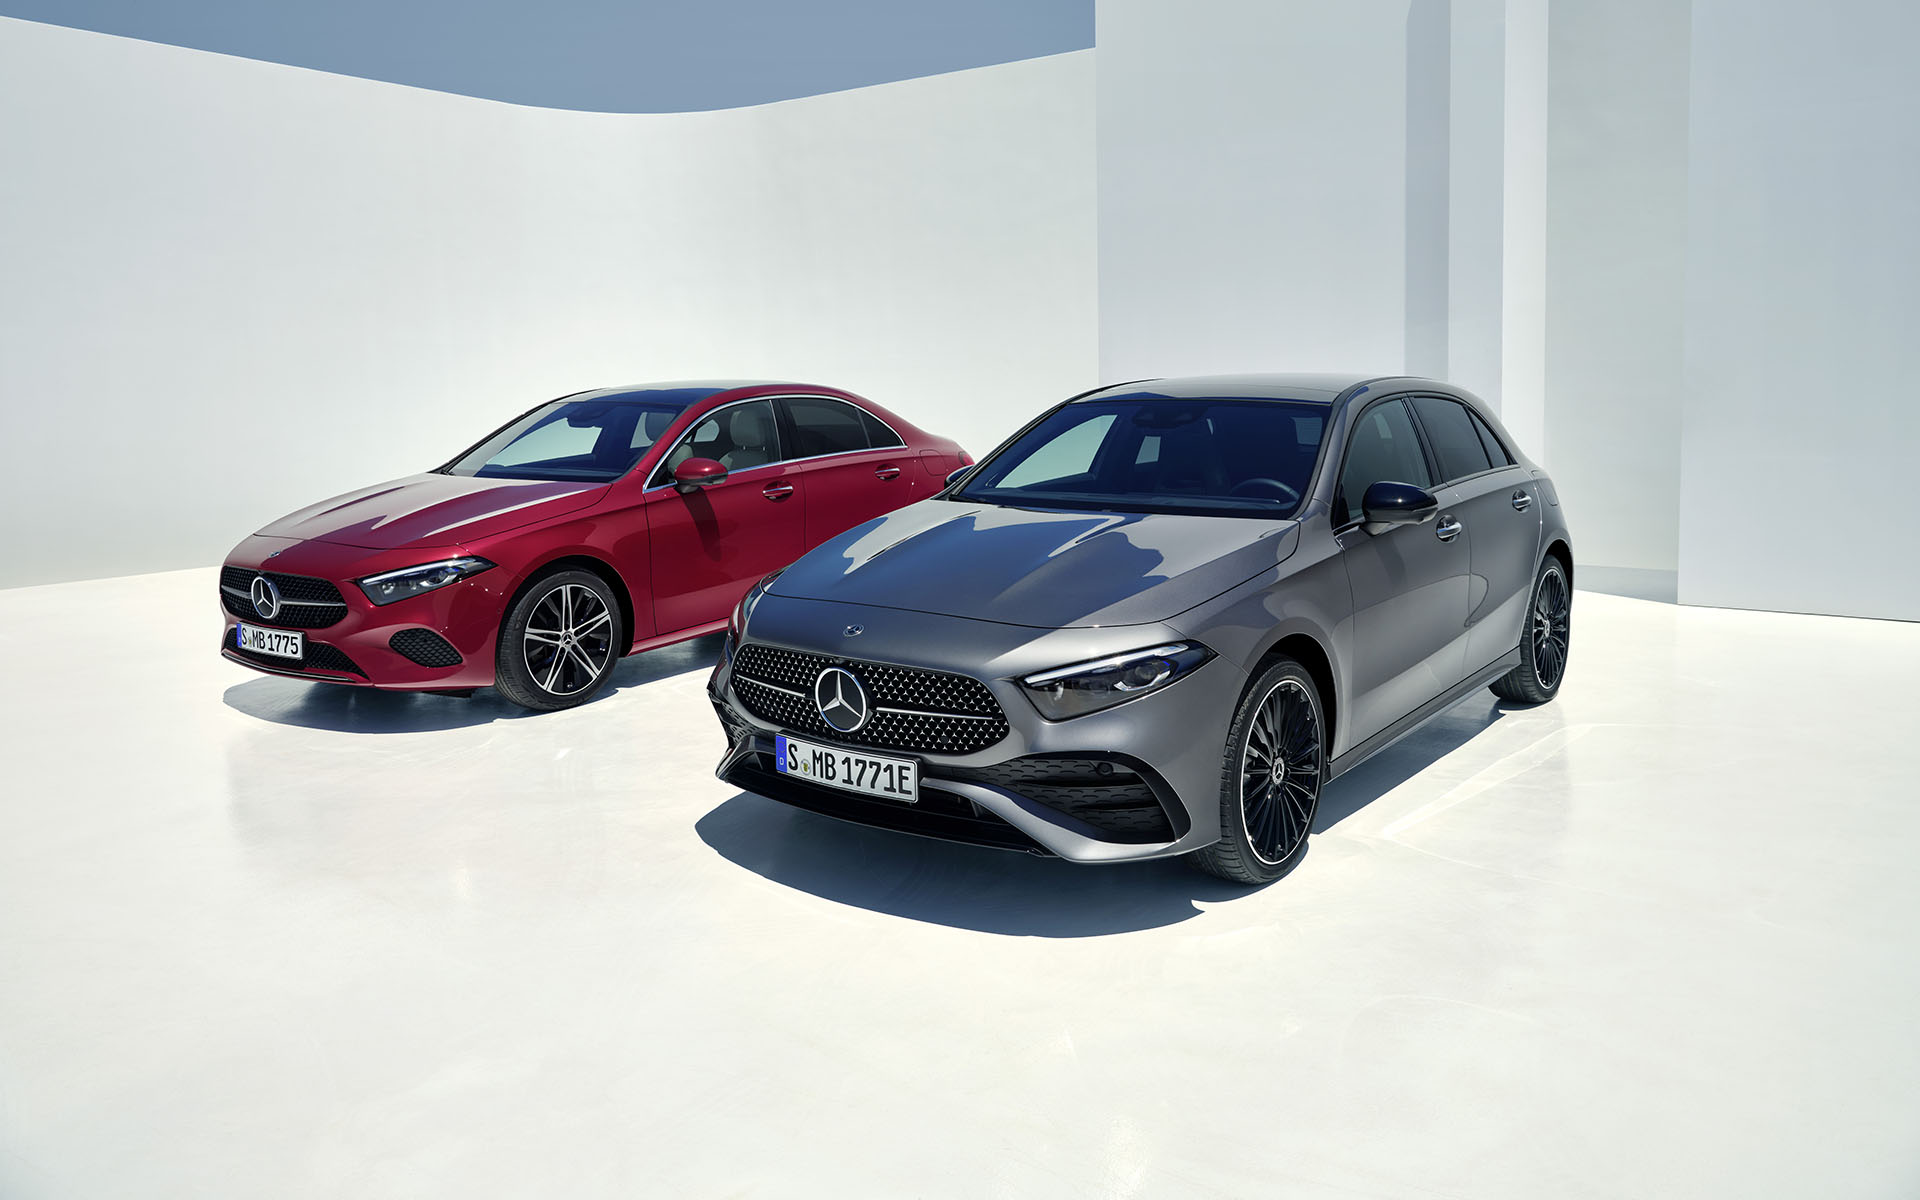 Mercedes-Benz A 250 e Hatchback: fuel consumption combined, weighted (WLTP) 1,1-0,8 l/100 km, electric energy consumption combined, weighted (WLTP) 17.0-15.0 kWh/100km, CO2 emissions combined, weighted (WLTP) 25-18 g/km [2]; exterior: mountain grey, AMG line[2] The stated figures are the measured "WLTP CO₂ figures" in accordance with Art. 2 No. 3 of Implementing Regulation (EU) 2017/1153. The fuel consumption figures were calculated on the basis of these figures. Electric energy consumption was determined on the basis of Commission Regulation (EU) 2017/1151. / Mercedes-Benz A-Class saloon; exterior: patagonia red MANUFAKTUR; progressive line Mercedes-Benz A 250 e Hatchback: fuel consumption combined, weighted (WLTP) 1,1-0,8 l/100 km, electric energy consumption combined, weighted (WLTP) 17.0-15.0 kWh/100km, CO2 emissions combined, weighted (WLTP) 25-18 g/km [2]; exterior: mountain grey, AMG line[2] The stated figures are the measured "WLTP CO₂ figures" in accordance with Art. 2 No. 3 of Implementing Regulation (EU) 2017/1153. The fuel consumption figures were calculated on the basis of these figures. Electric energy consumption was determined on the basis of Commission Regulation (EU) 2017/1151. / Mercedes-Benz A-Class saloon; exterior: patagonia red MANUFAKTUR; progressive line